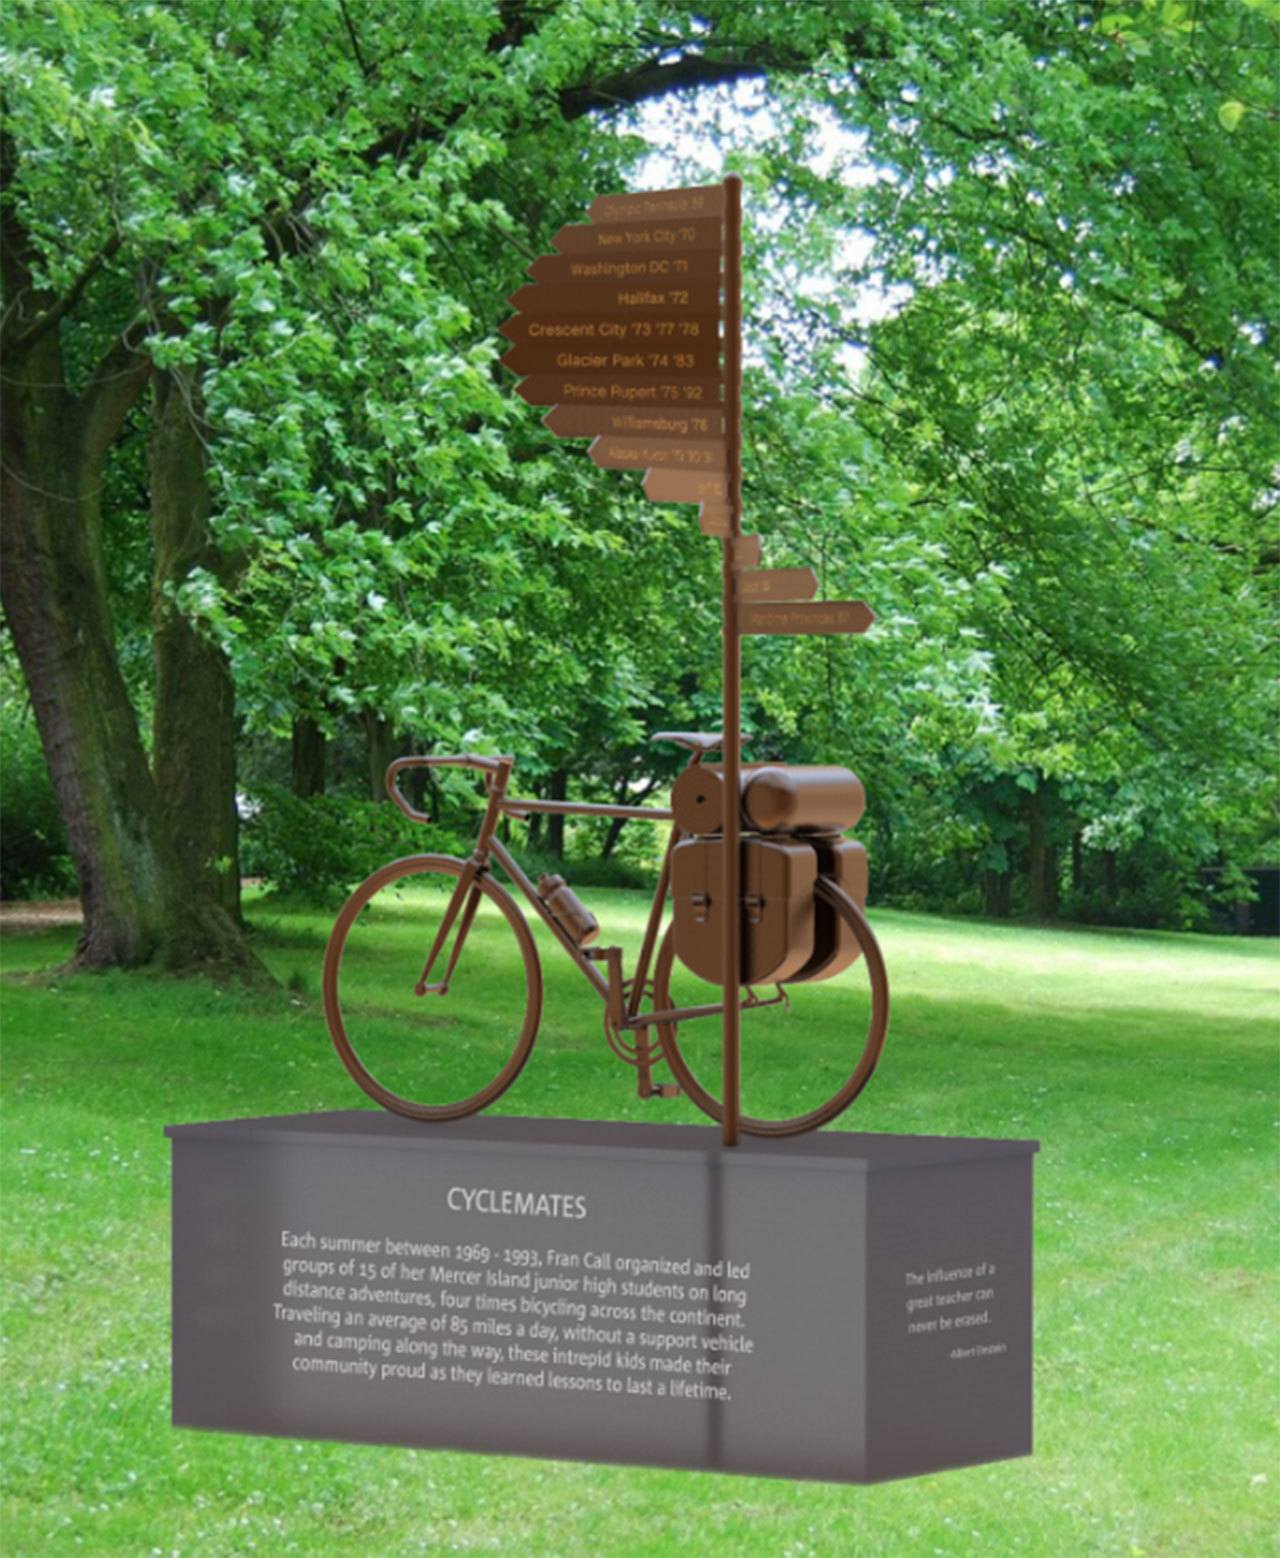 A bronze sculpture designed by artist Pamela DeVries will commemorate Fran Call’s Cyclemates. Image courtesy of Cyclemates